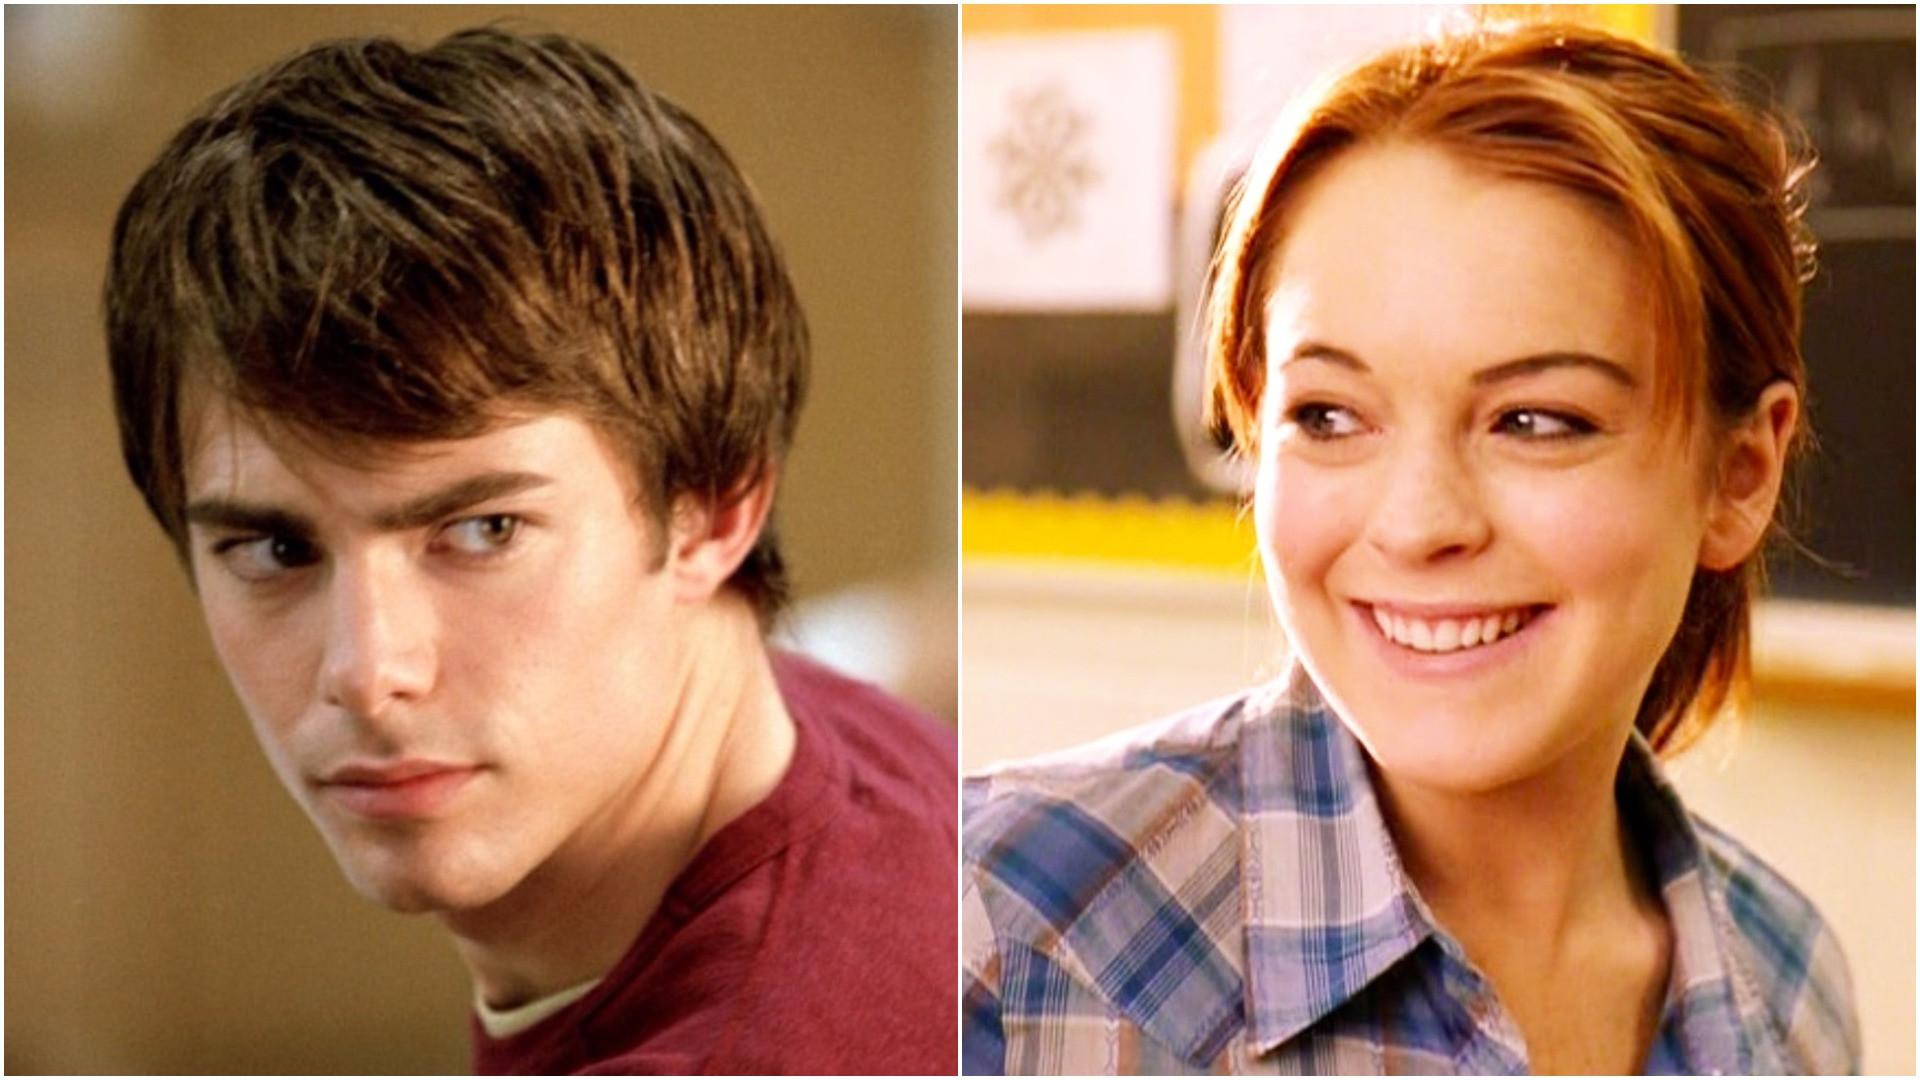 Mean Girls Day: The internet is lusting after Aaron Samuels